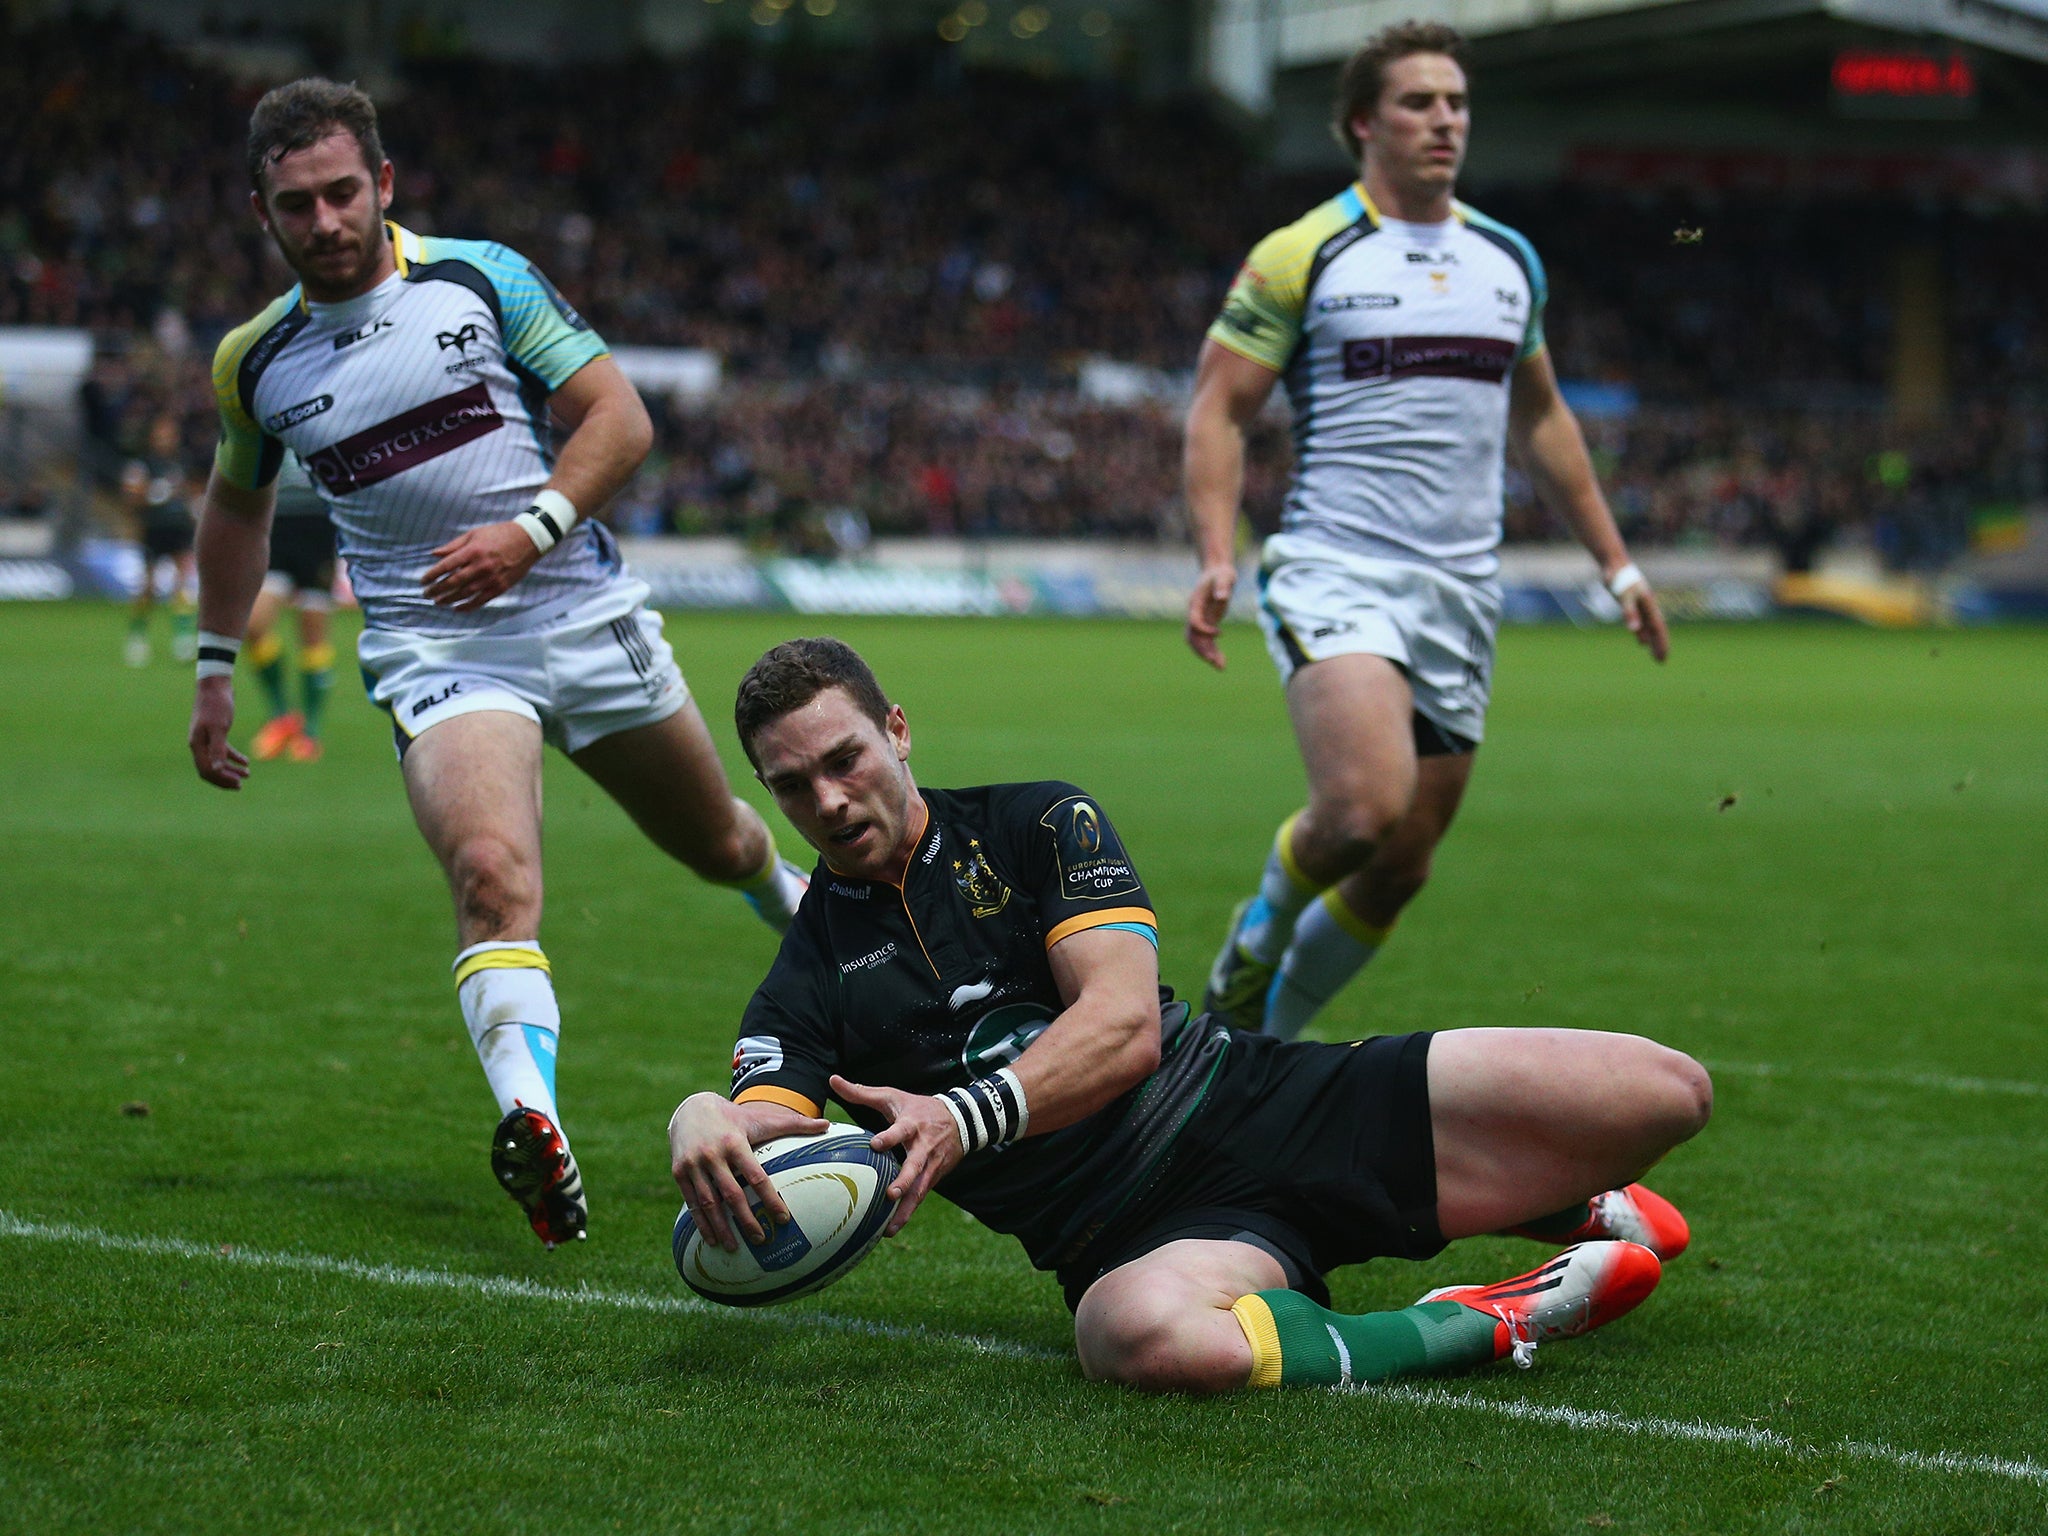 George North of Northampton Saints scores the first try during the European Rugby Champions Cup Pool 5 match between Northampton Saints and Ospreys